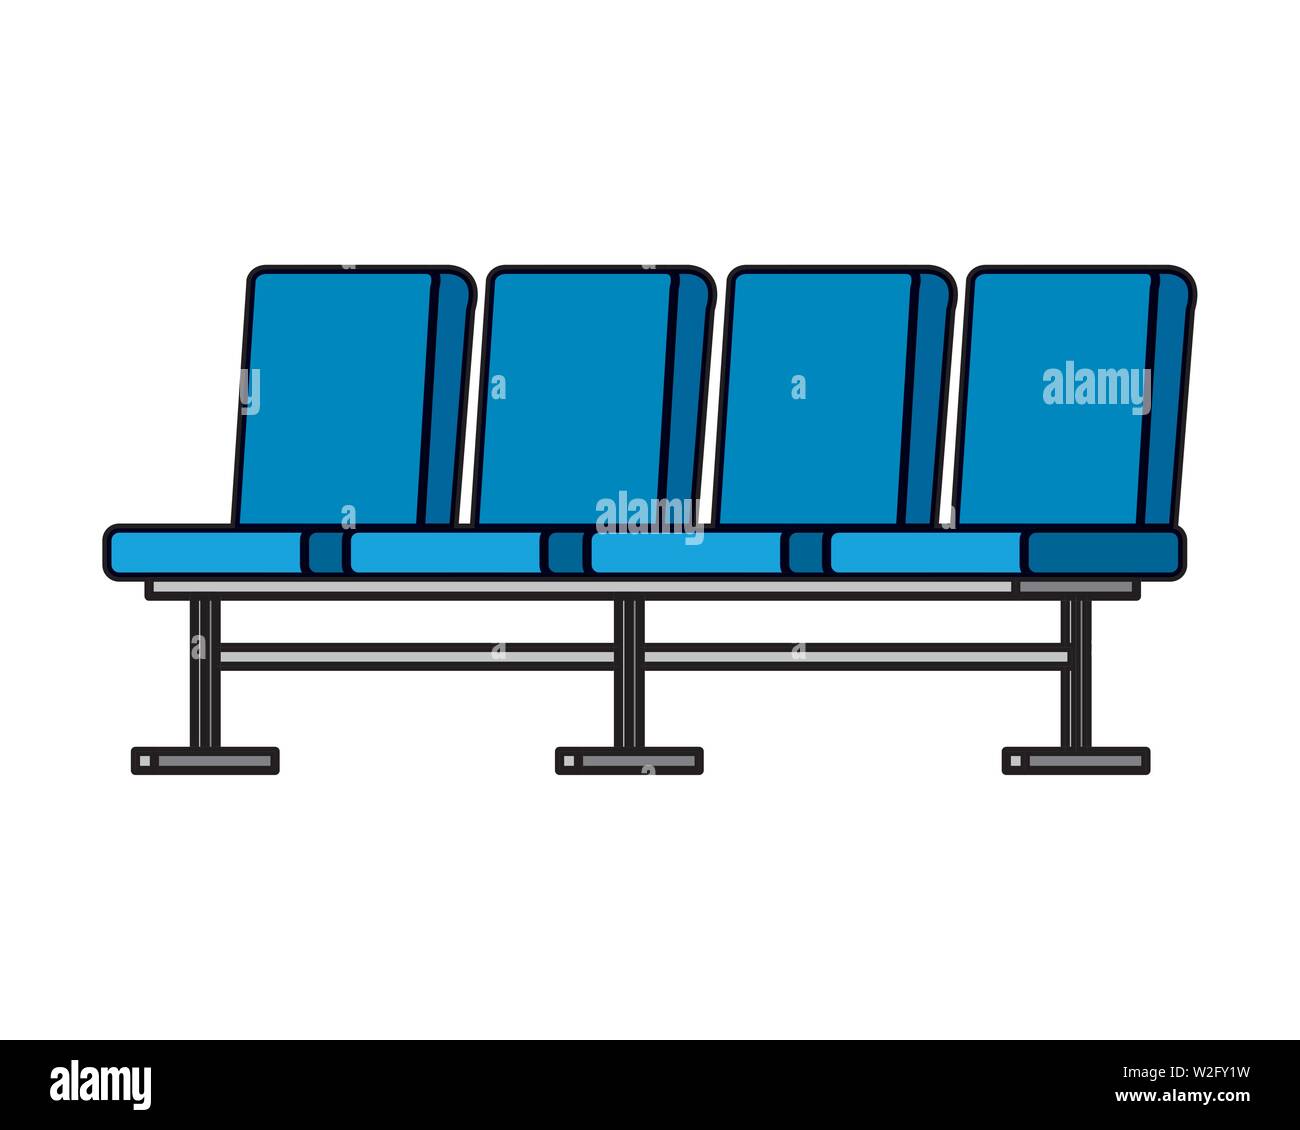 waiting room set chairs icons Stock Vector